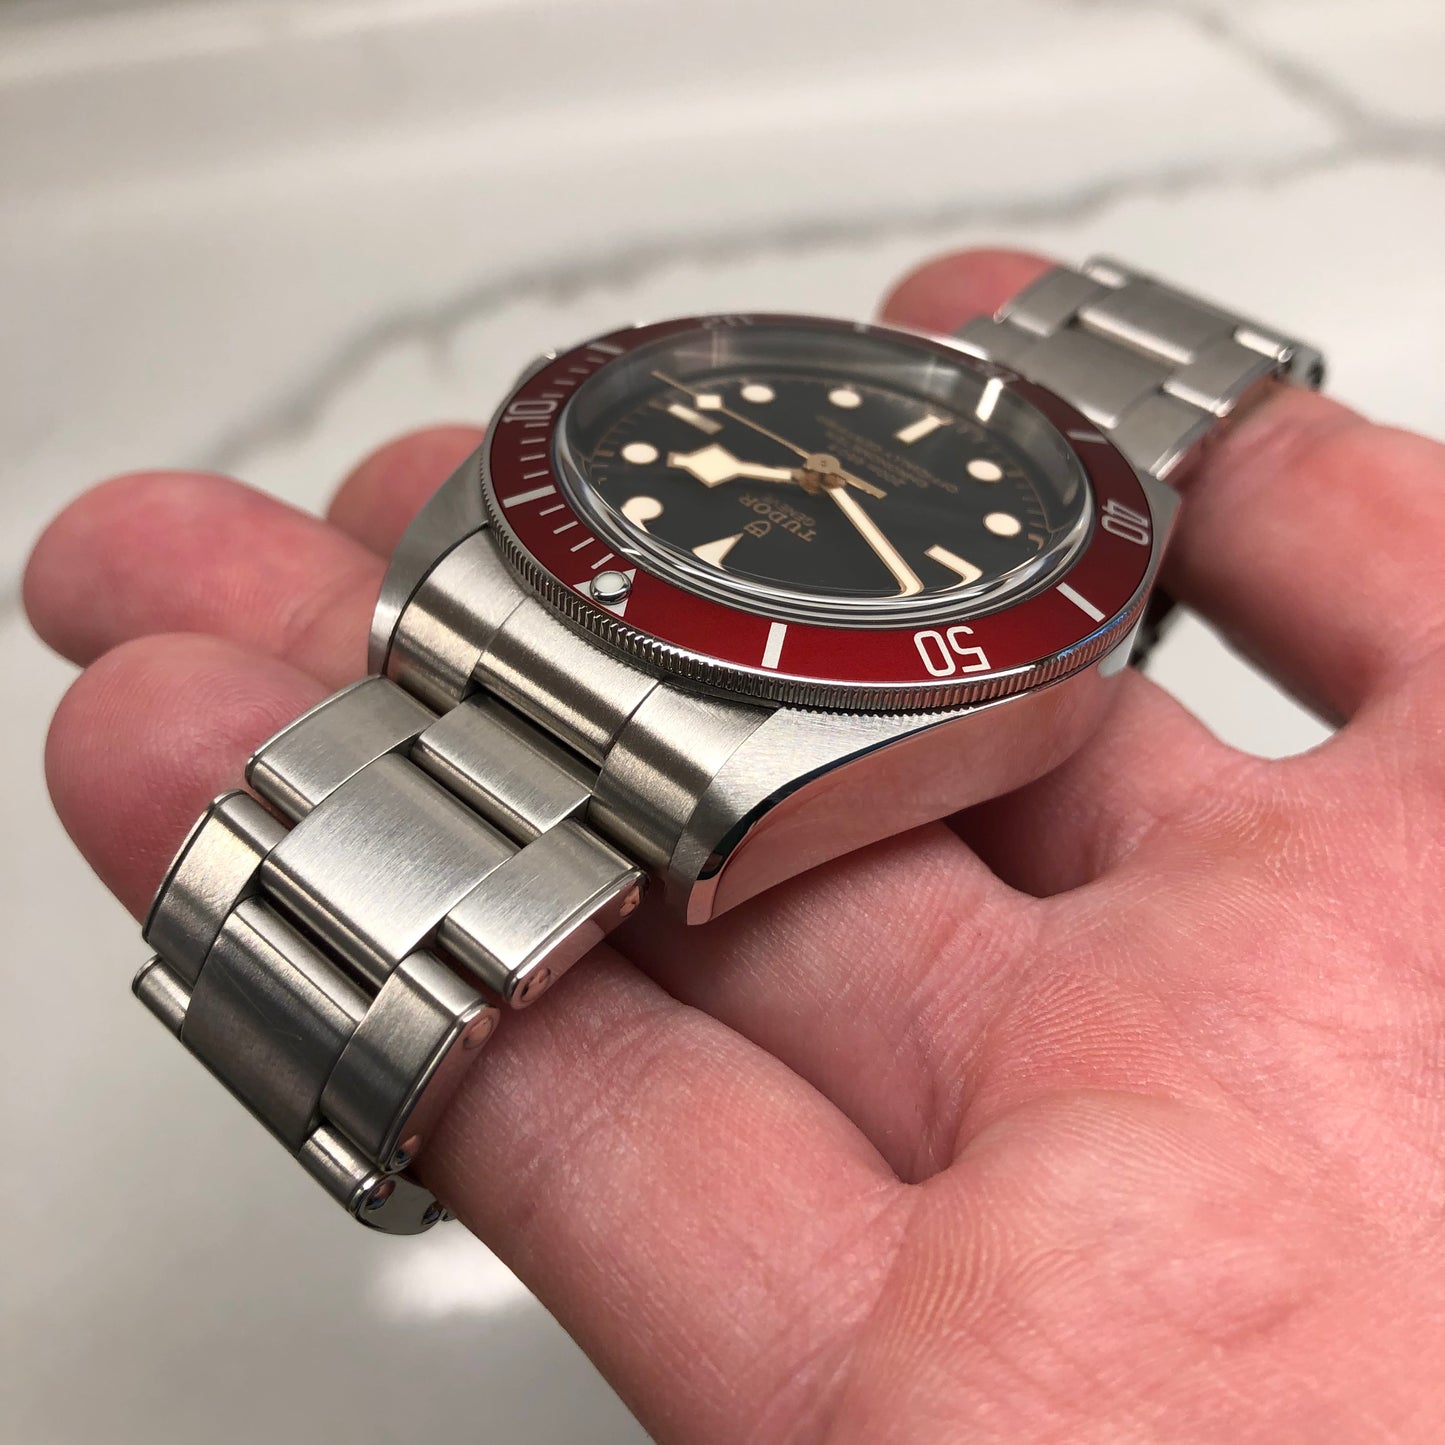 2022 Tudor Heritage Black Bay 79230R Red Bezel Automatic 41mm Wristwatch Box Papers - Hashtag Watch Company